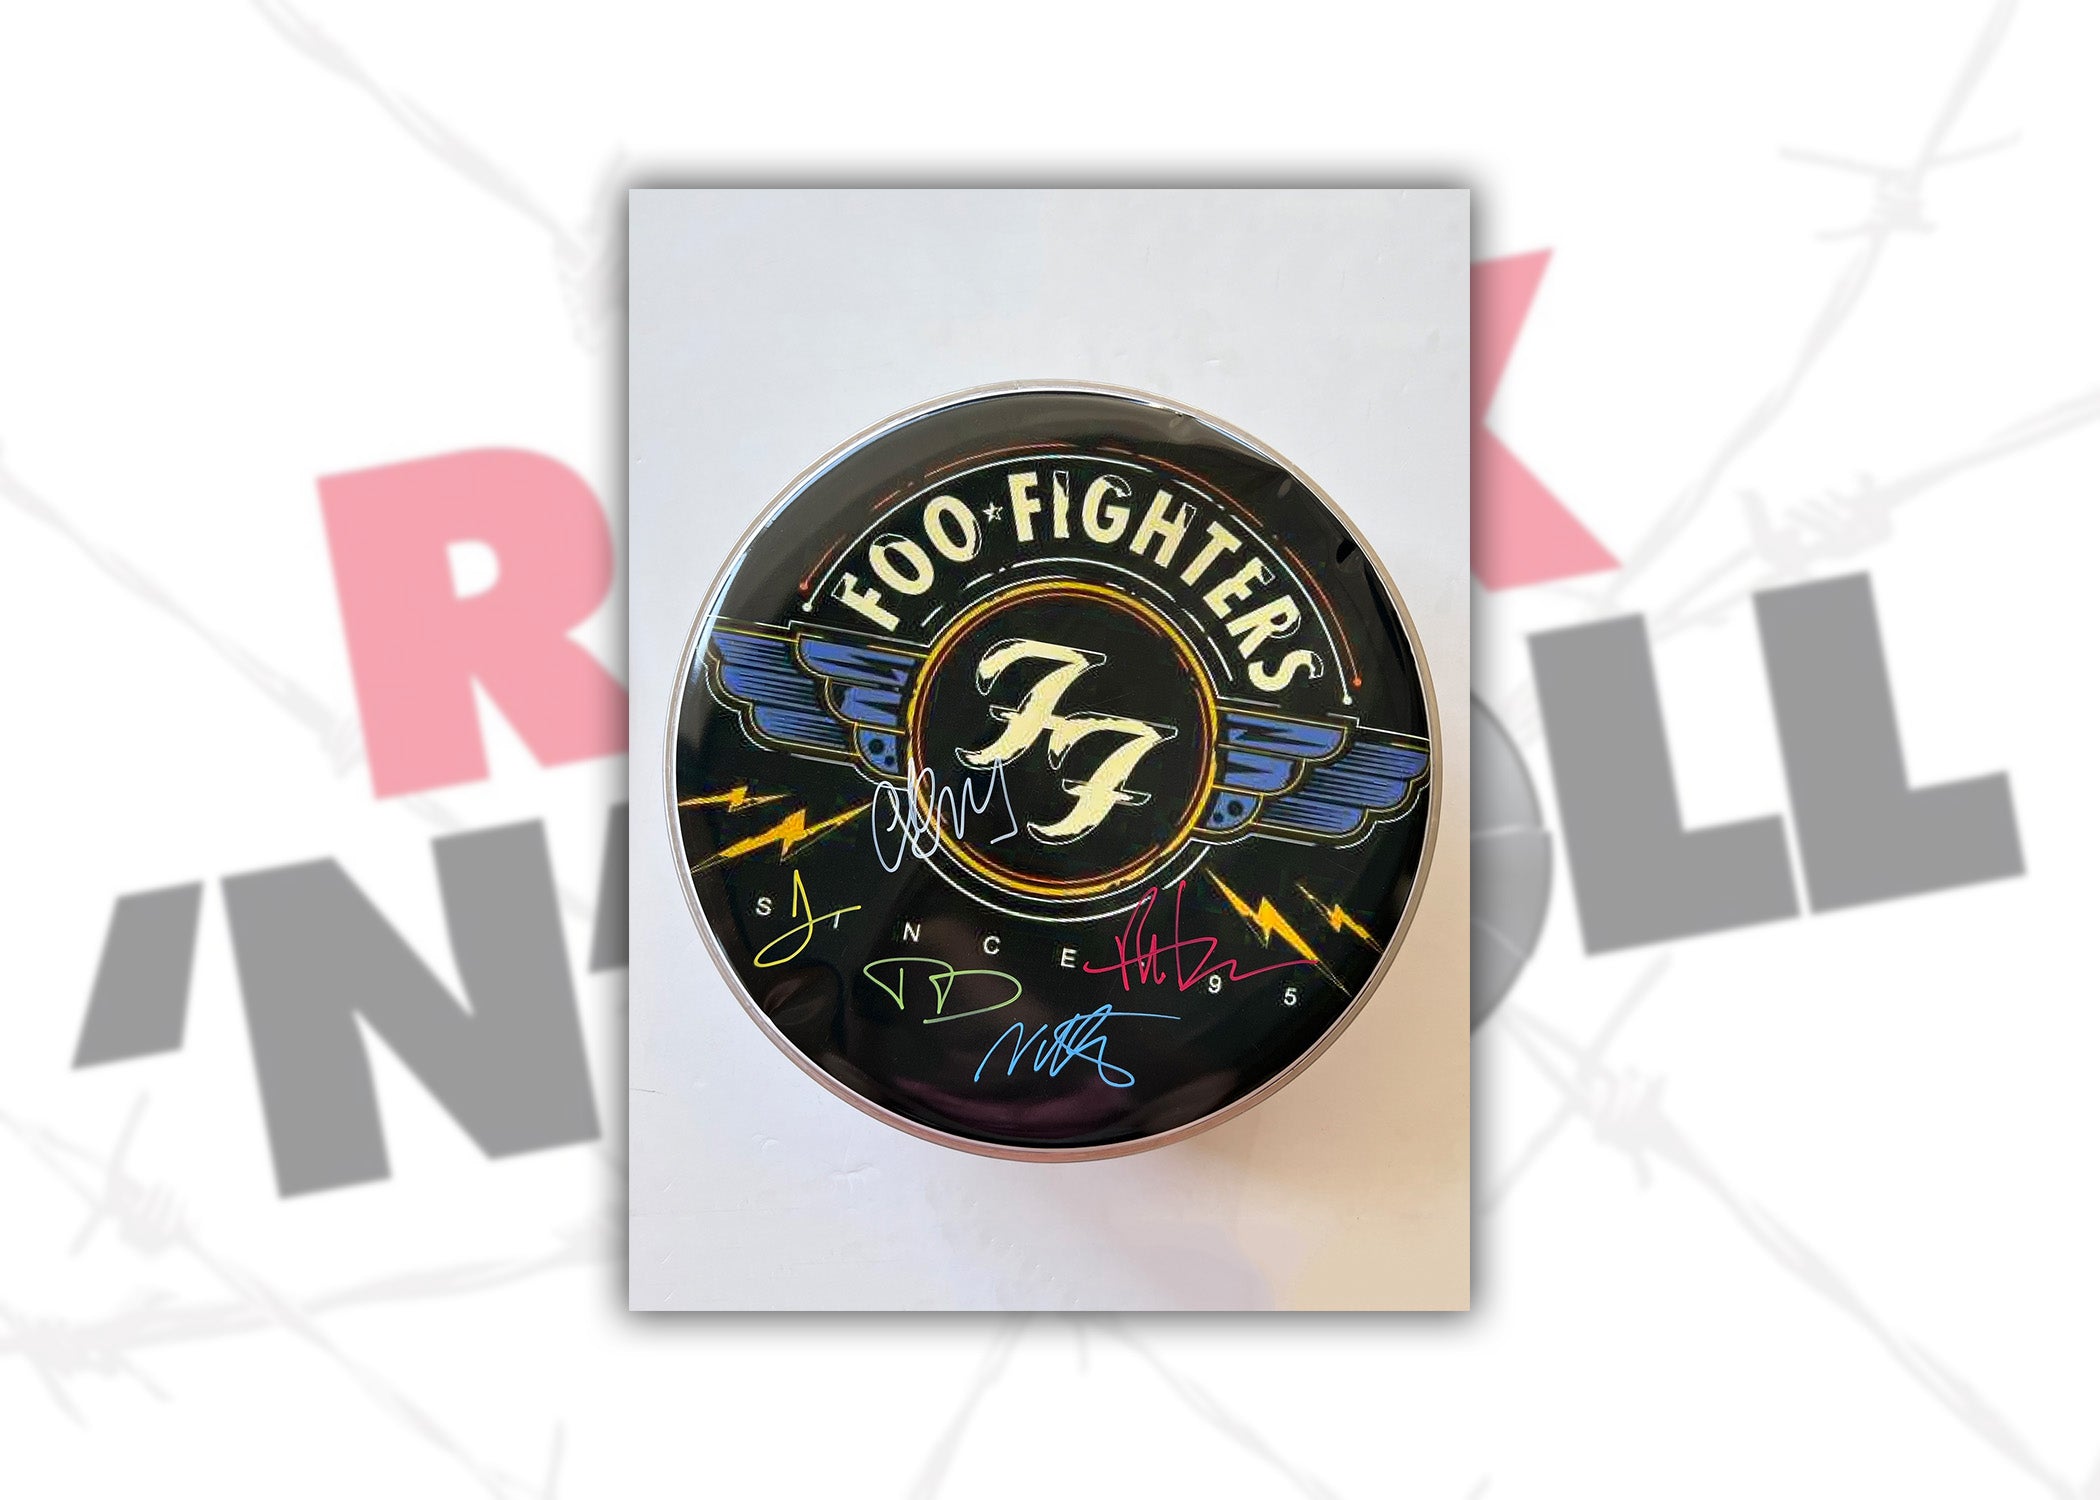 David Grohl, Taylor Hawkins, the Foo Fighters one-of-a-kind drumhead signed with proof